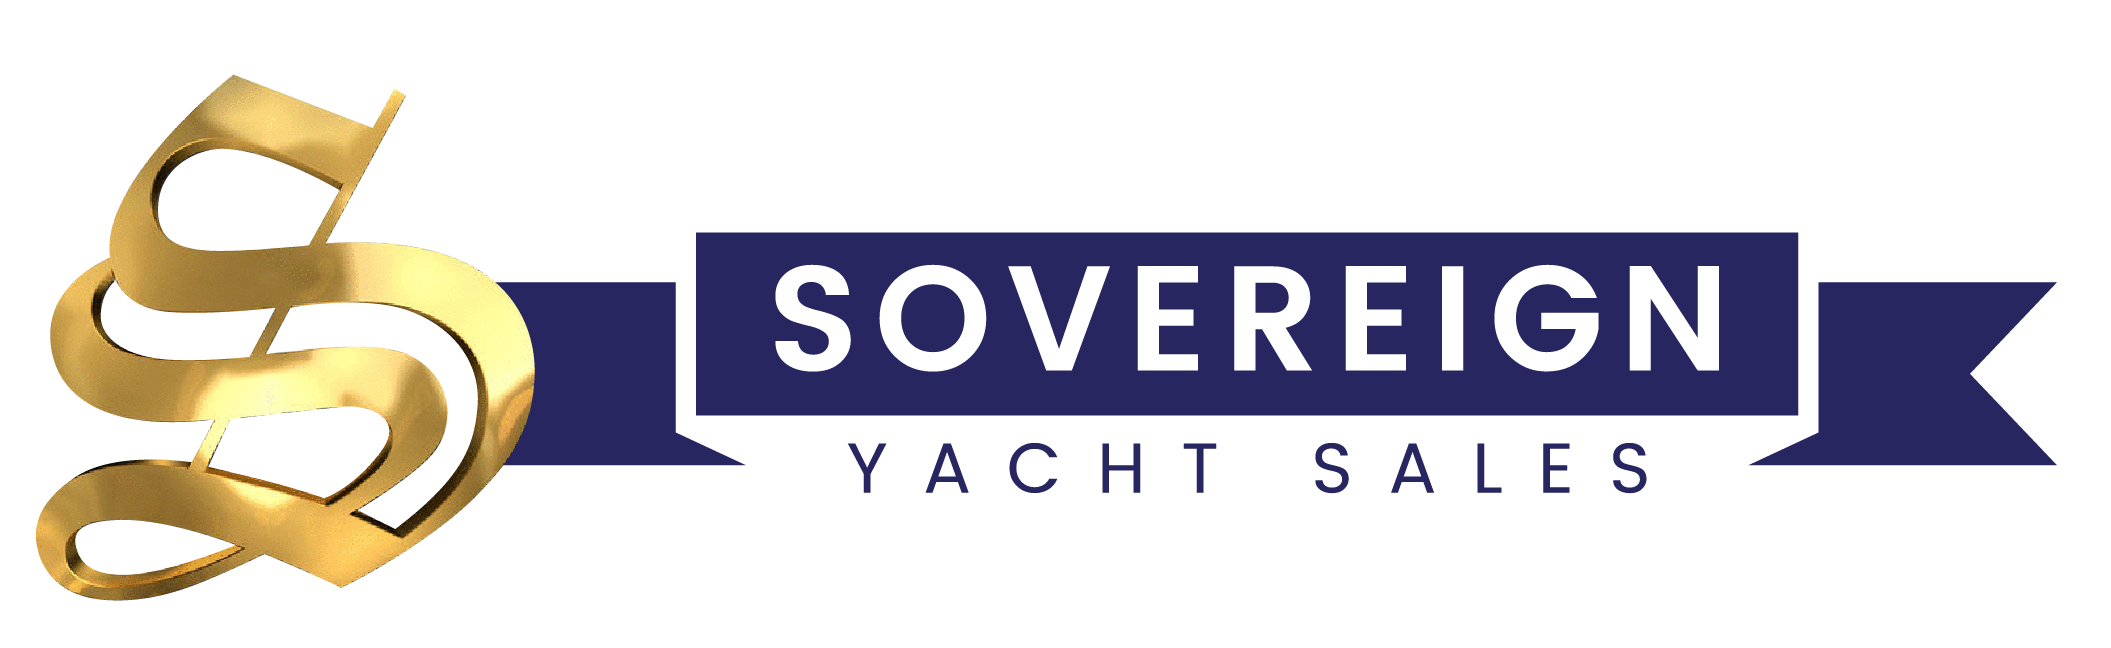 Sovereign Yacht Sales